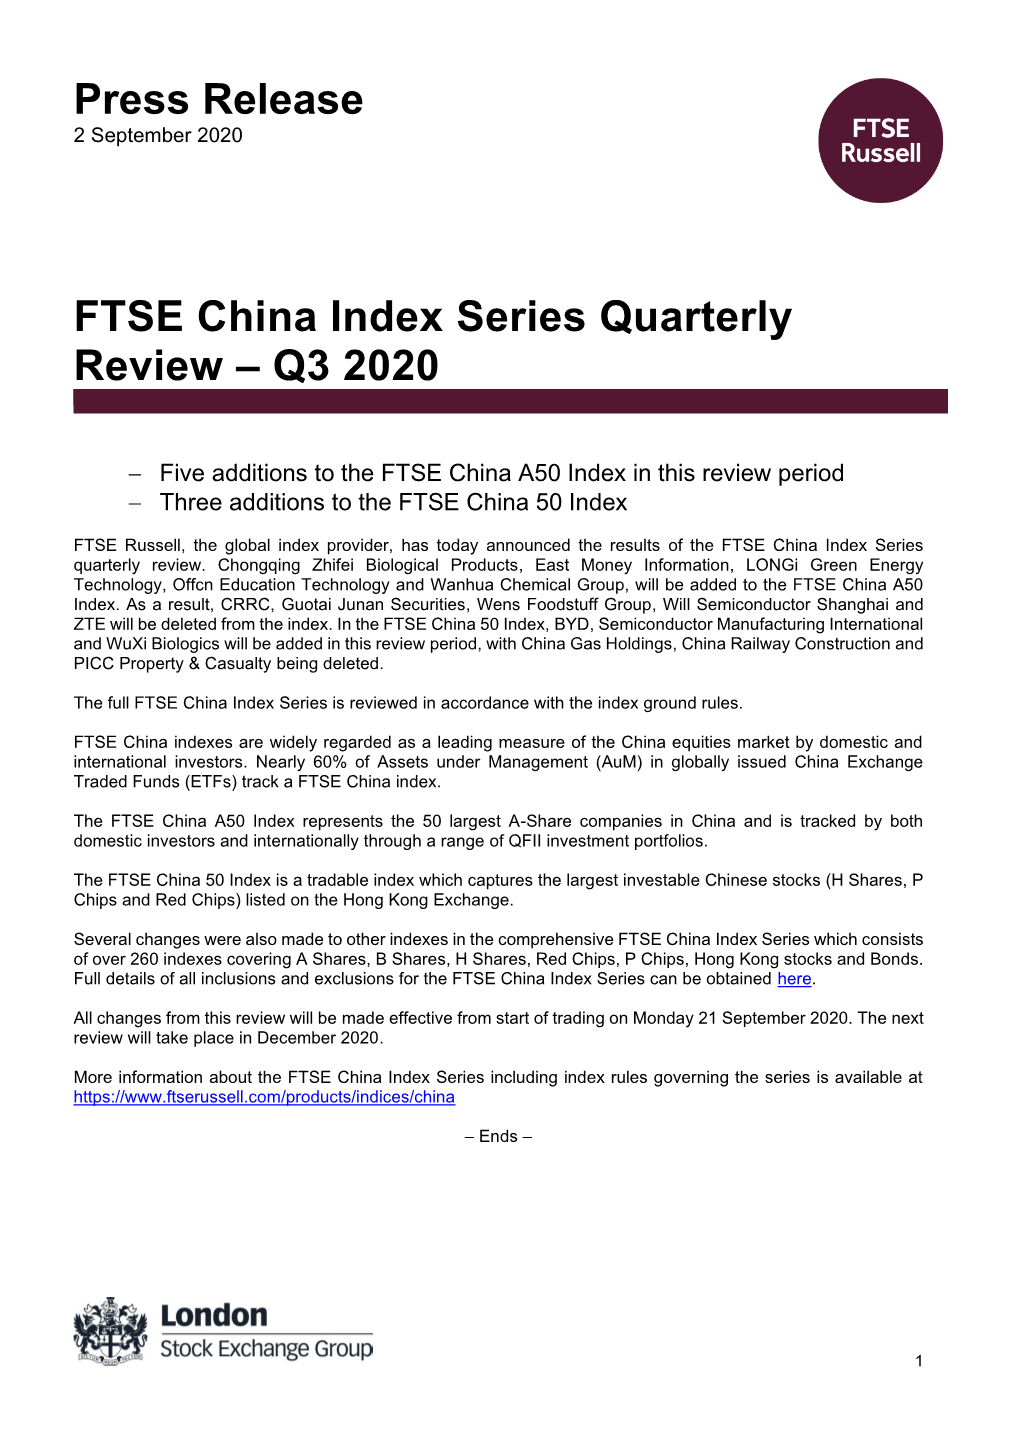 FTSE China Index Series Quarterly Review – Q3 2020